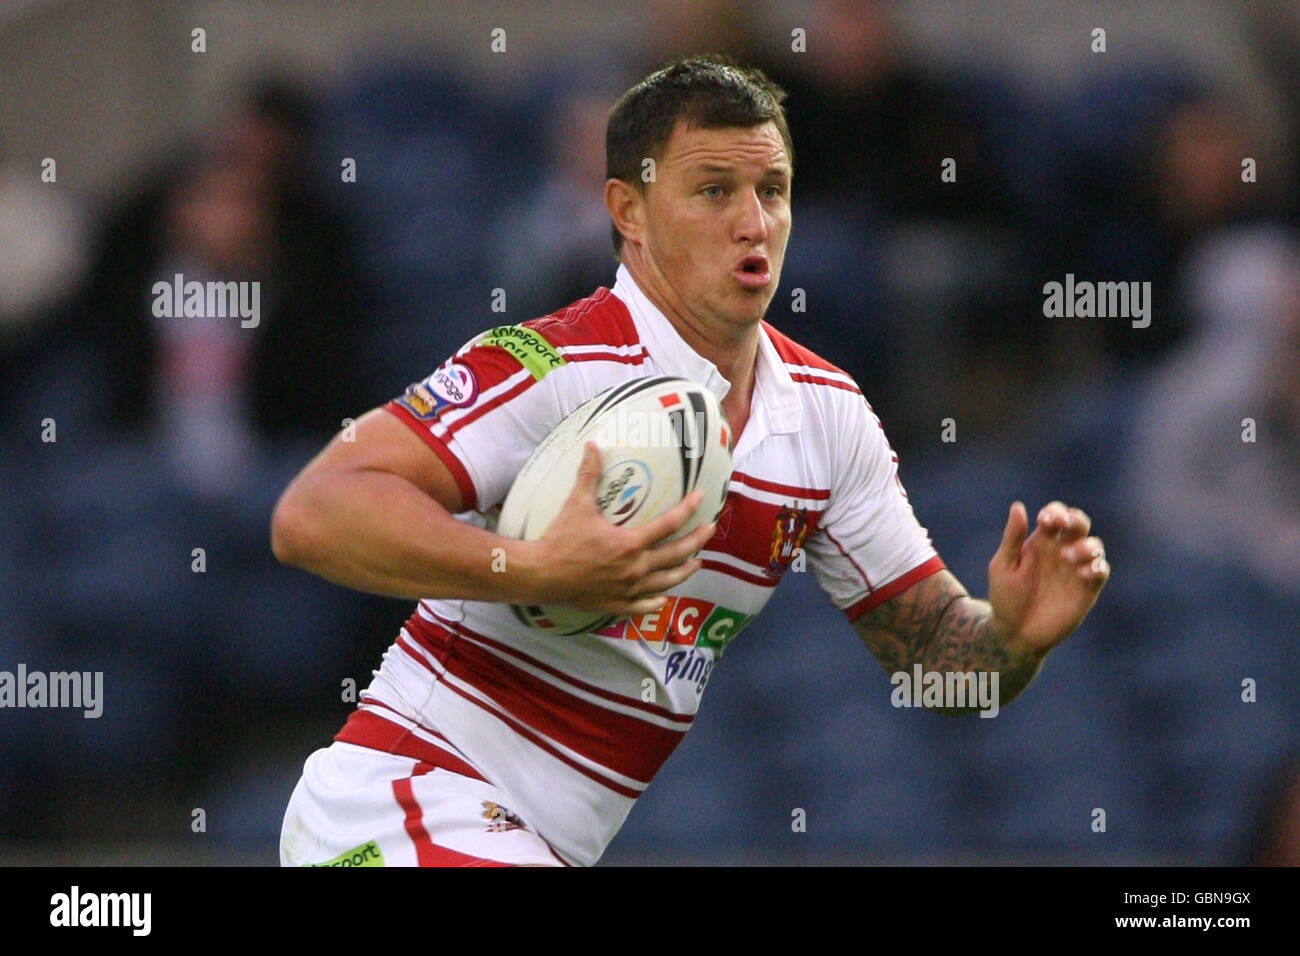 Rugby League - Engage Super League - The Magic Weekend - Wigan Warriors contra St Helens - Murrayfield. Tim Smith, Wigan Warriors Foto de stock